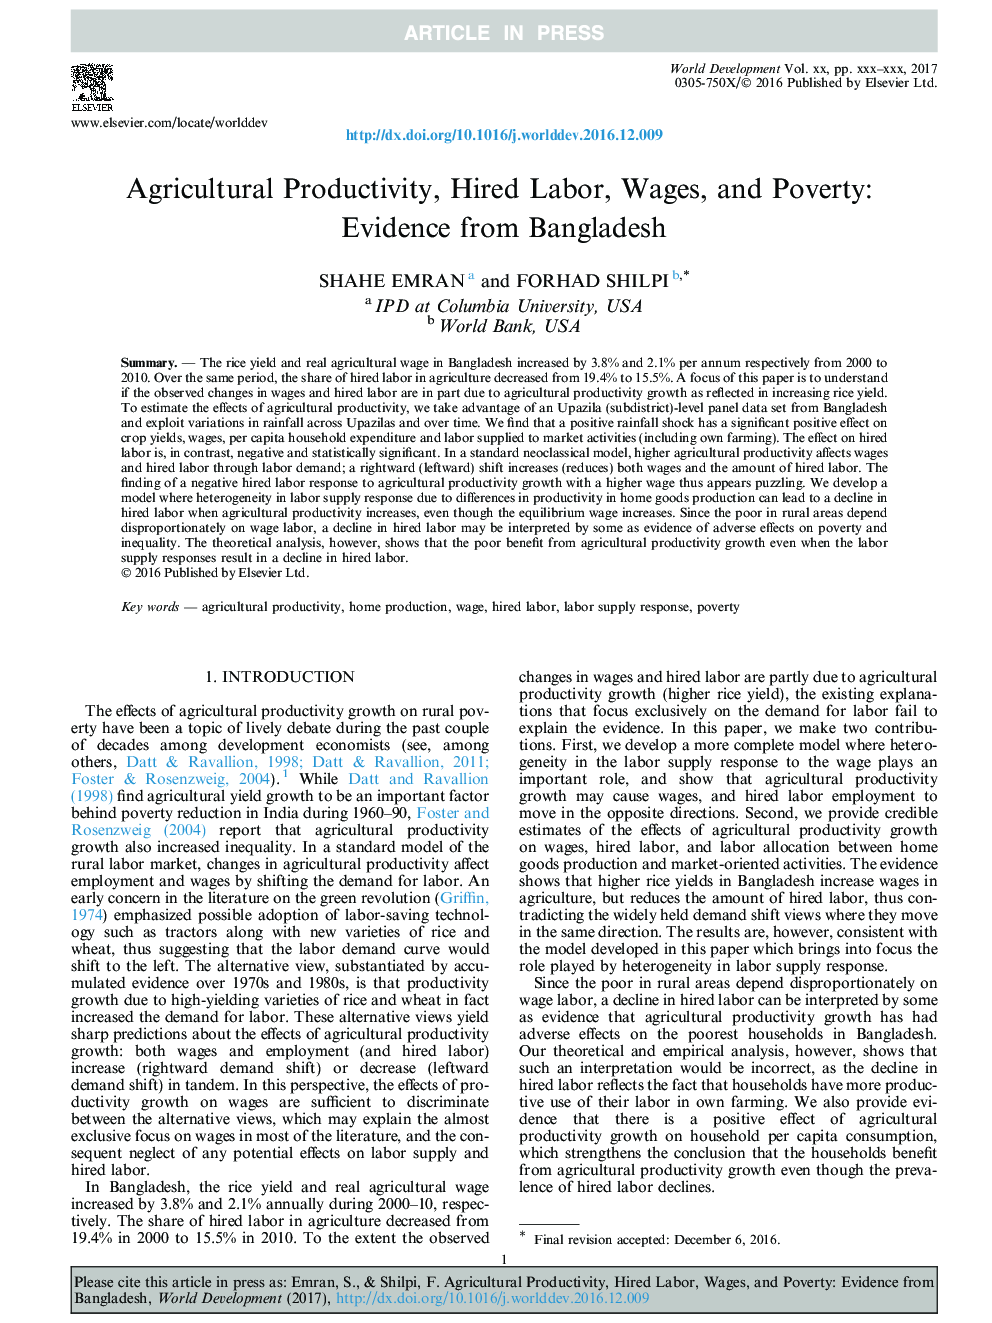 Agricultural Productivity, Hired Labor, Wages, and Poverty: Evidence from Bangladesh